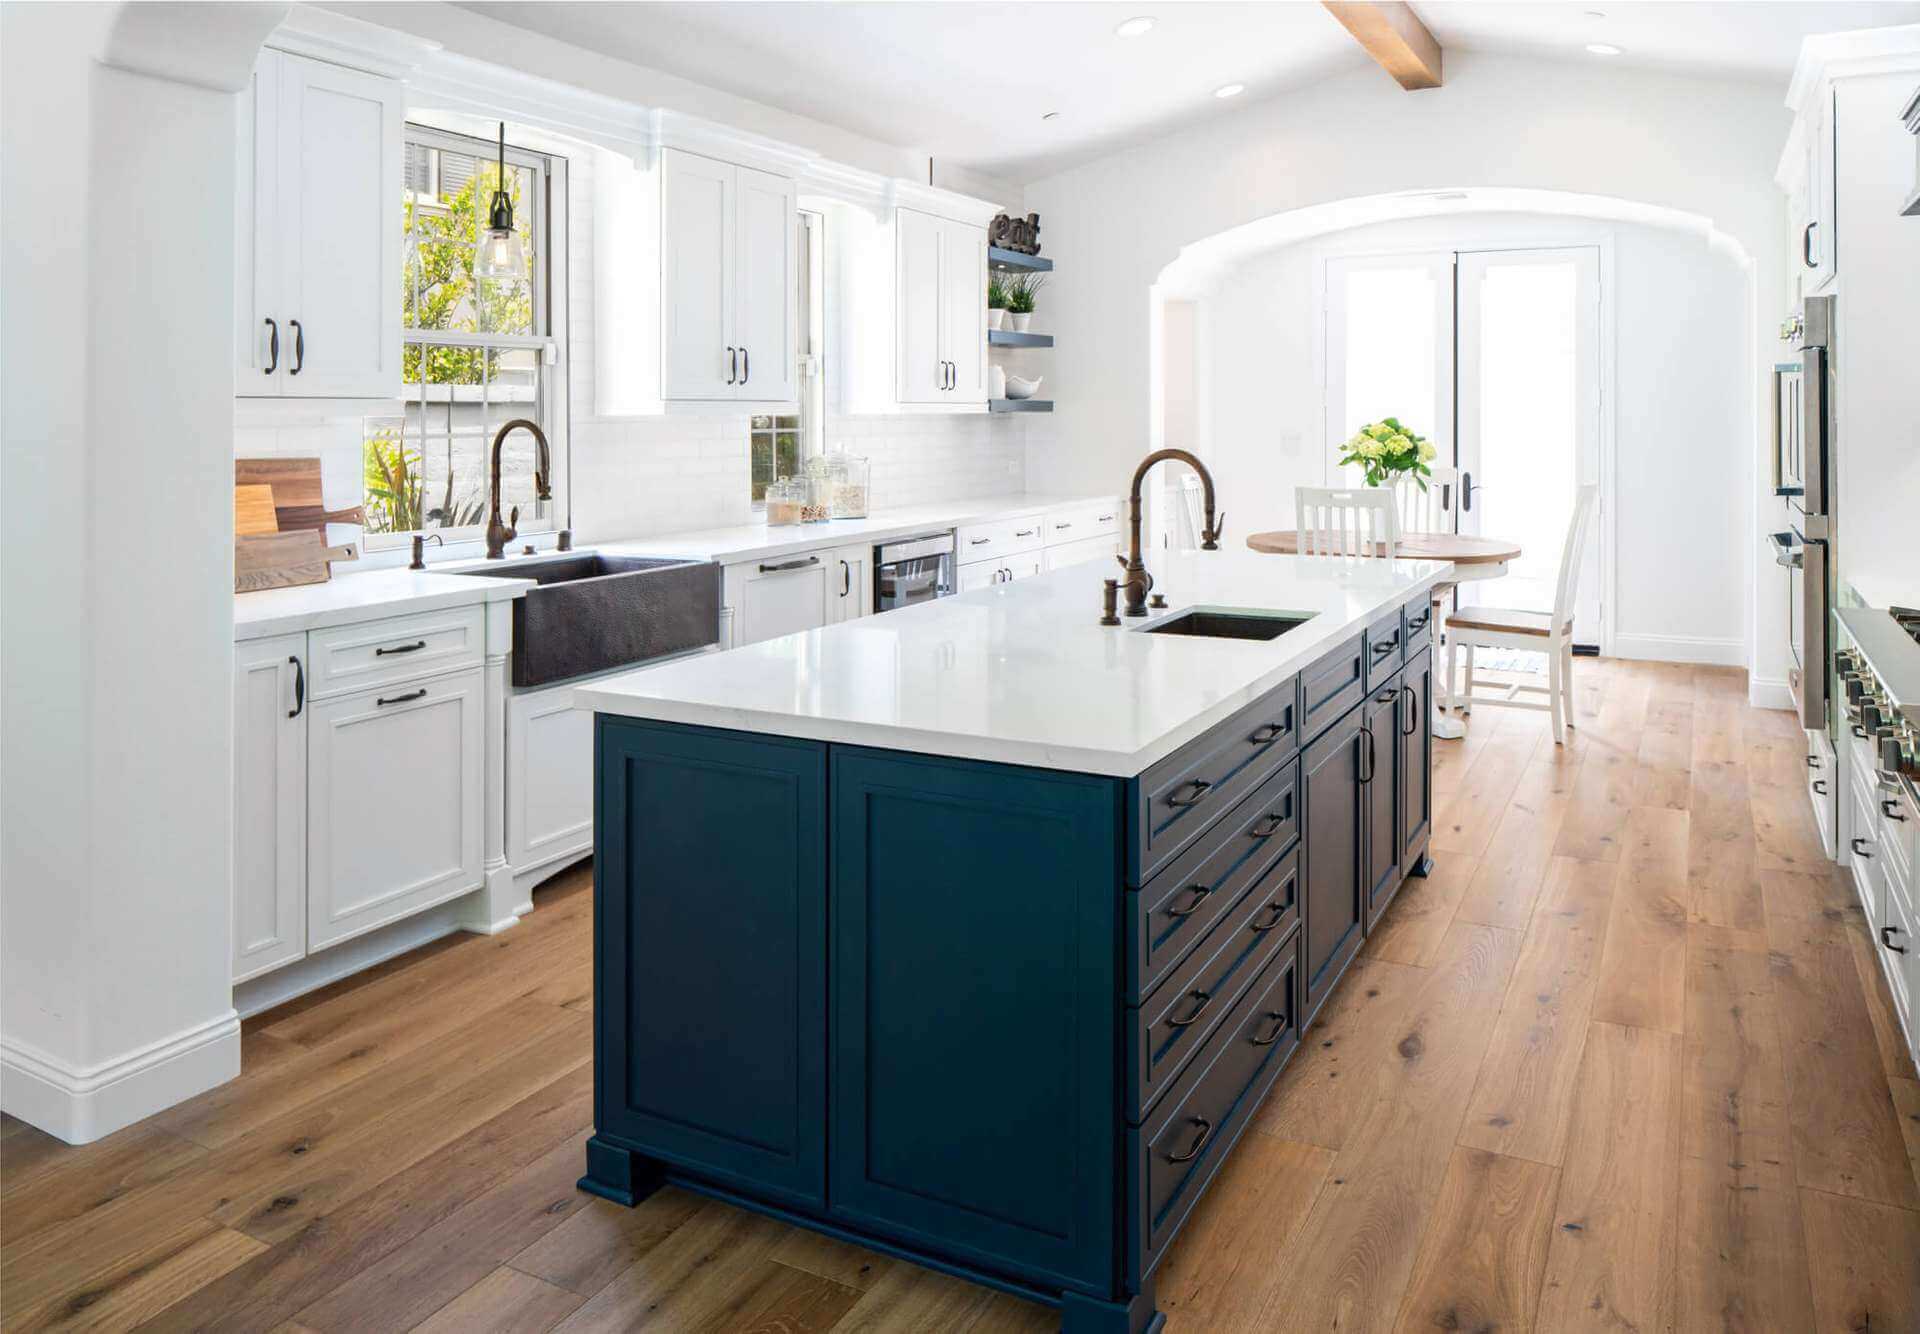 Kitchen Cabinet Trends For 2020, What Is The Latest Look In Kitchen Cabinets